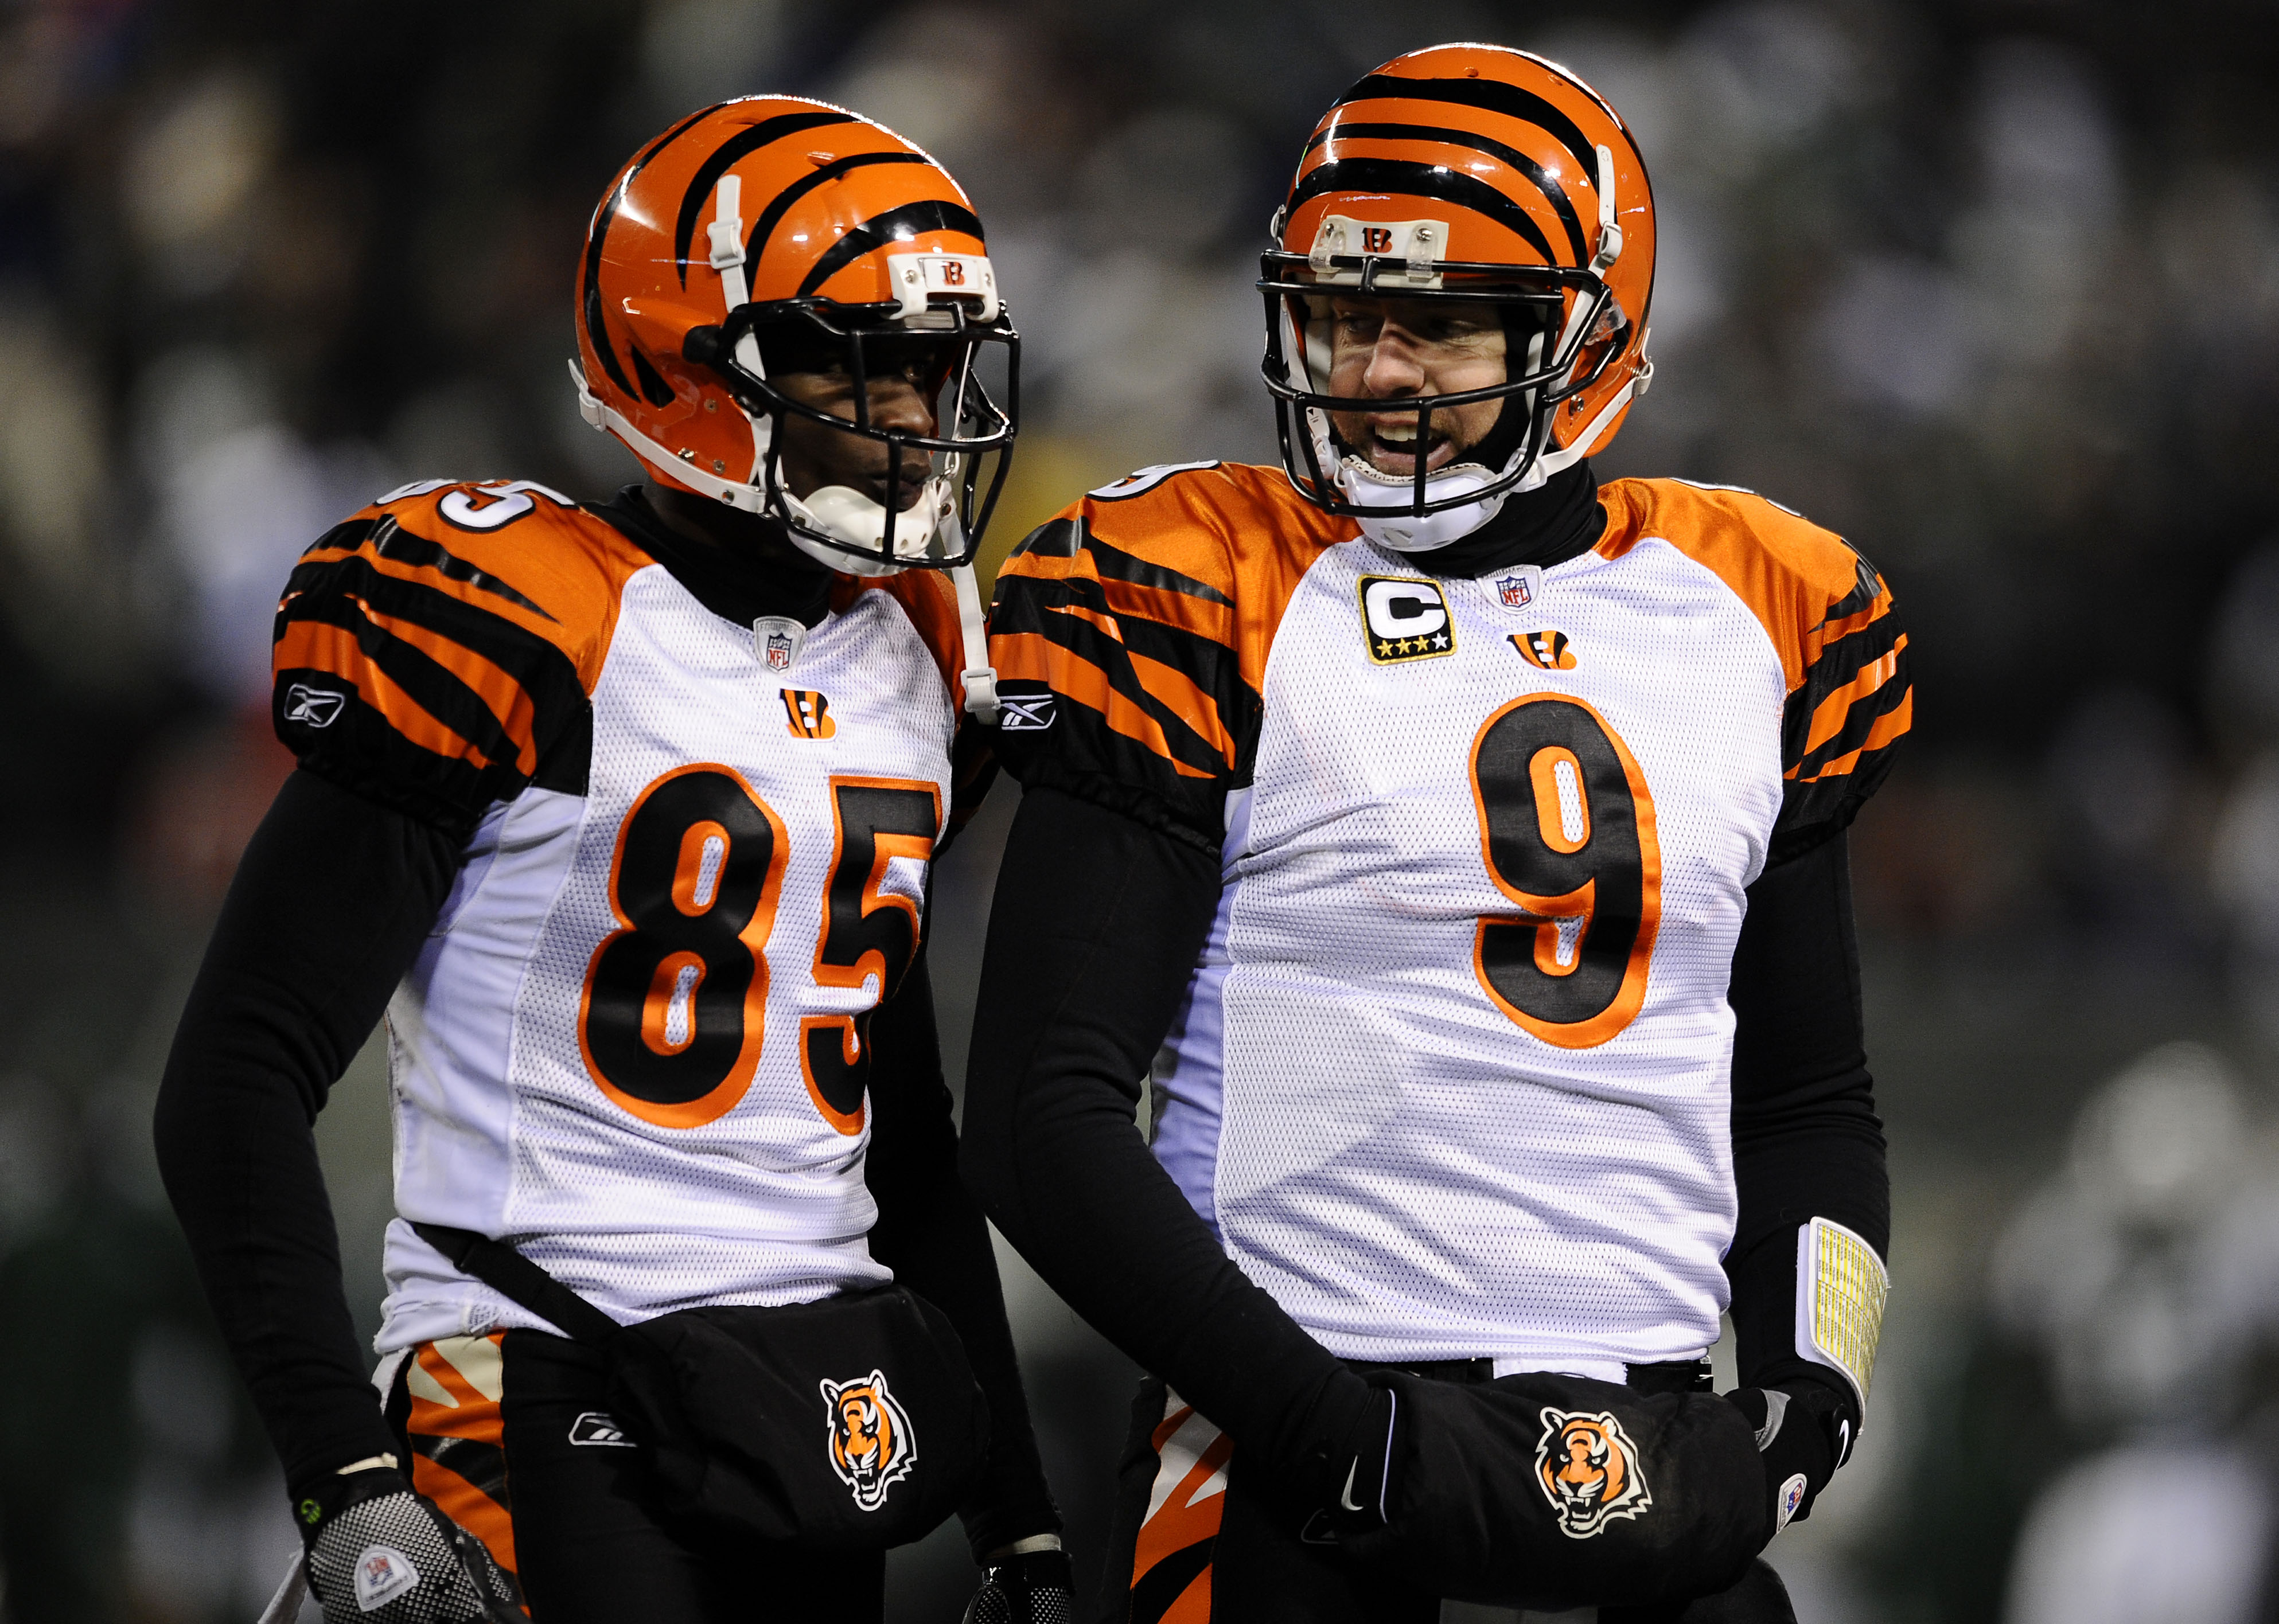 EAST RUTHERFORD, NJ - JANUARY 03:  Quarterback Carson Palmer #9 of the Cincinnati Bengals talks with teammate Chad Ochocinco #85 during the game against the New York Jets at Giants Stadium on January 3, 2010 in East Rutherford, New Jersey.  (Photo by Jeff